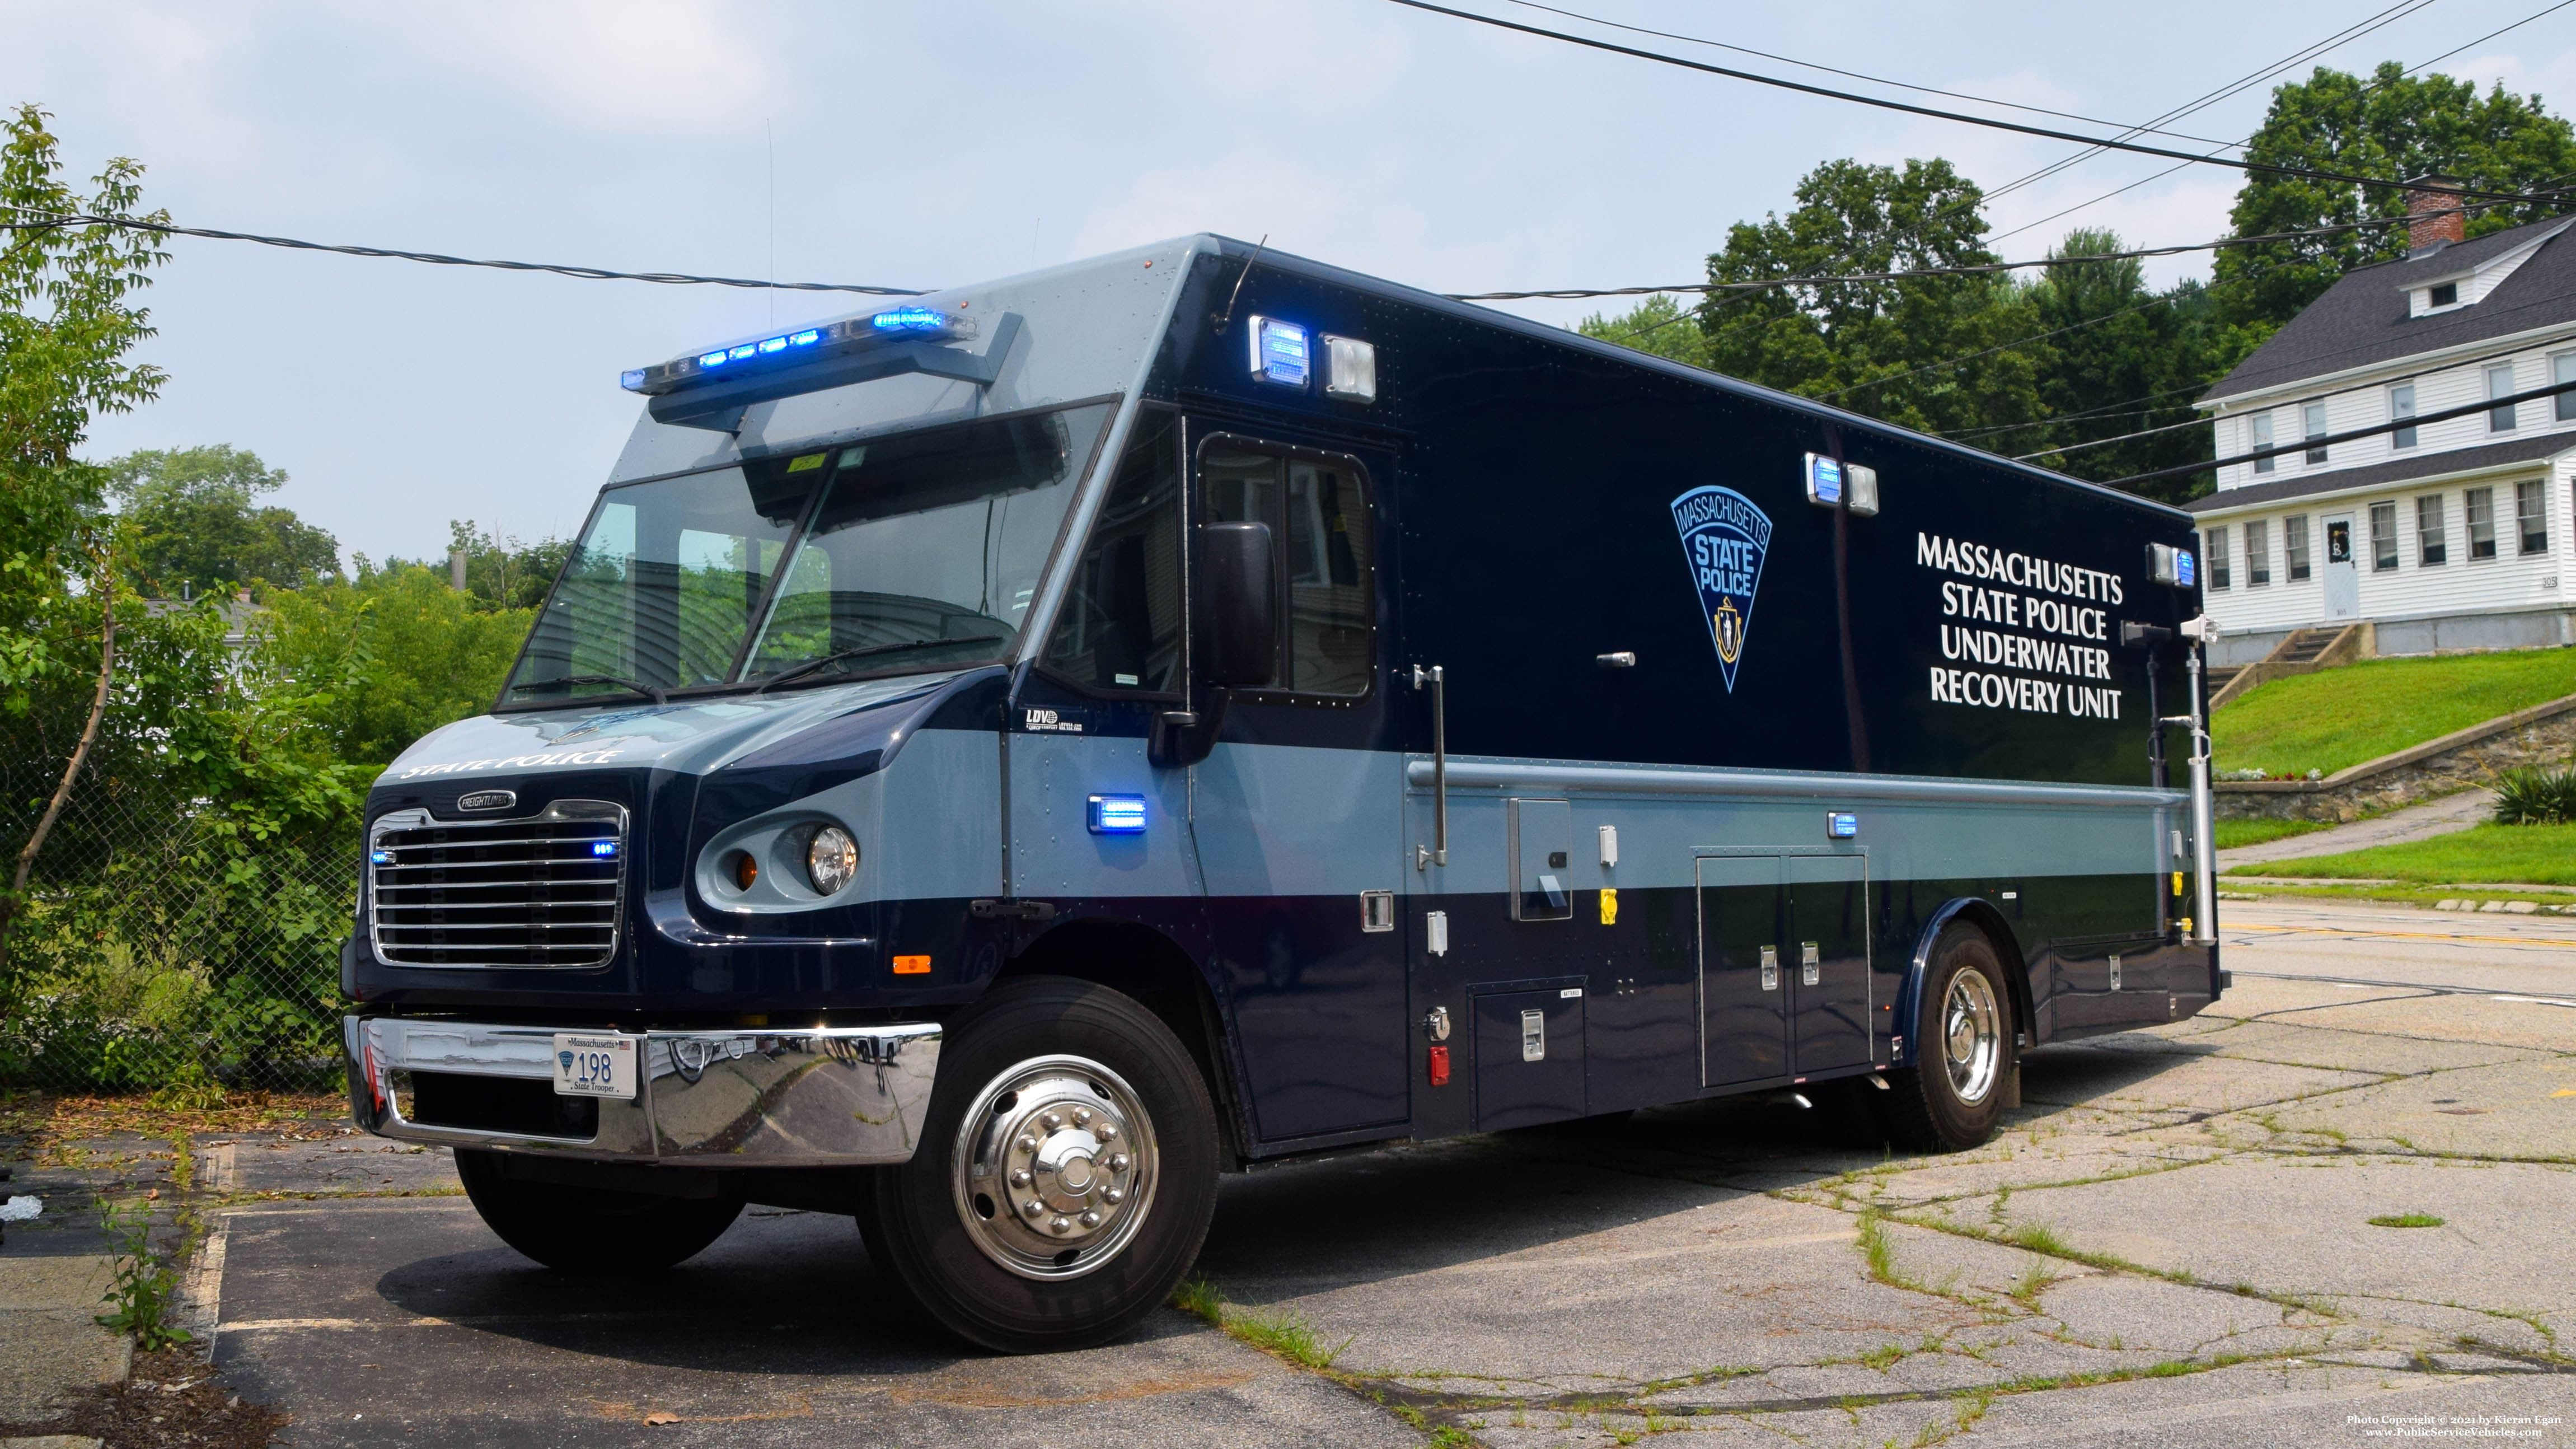 A photo  of Massachusetts State Police
            Underwater Recover Unit 198, a 2012 Freightliner             taken by Kieran Egan